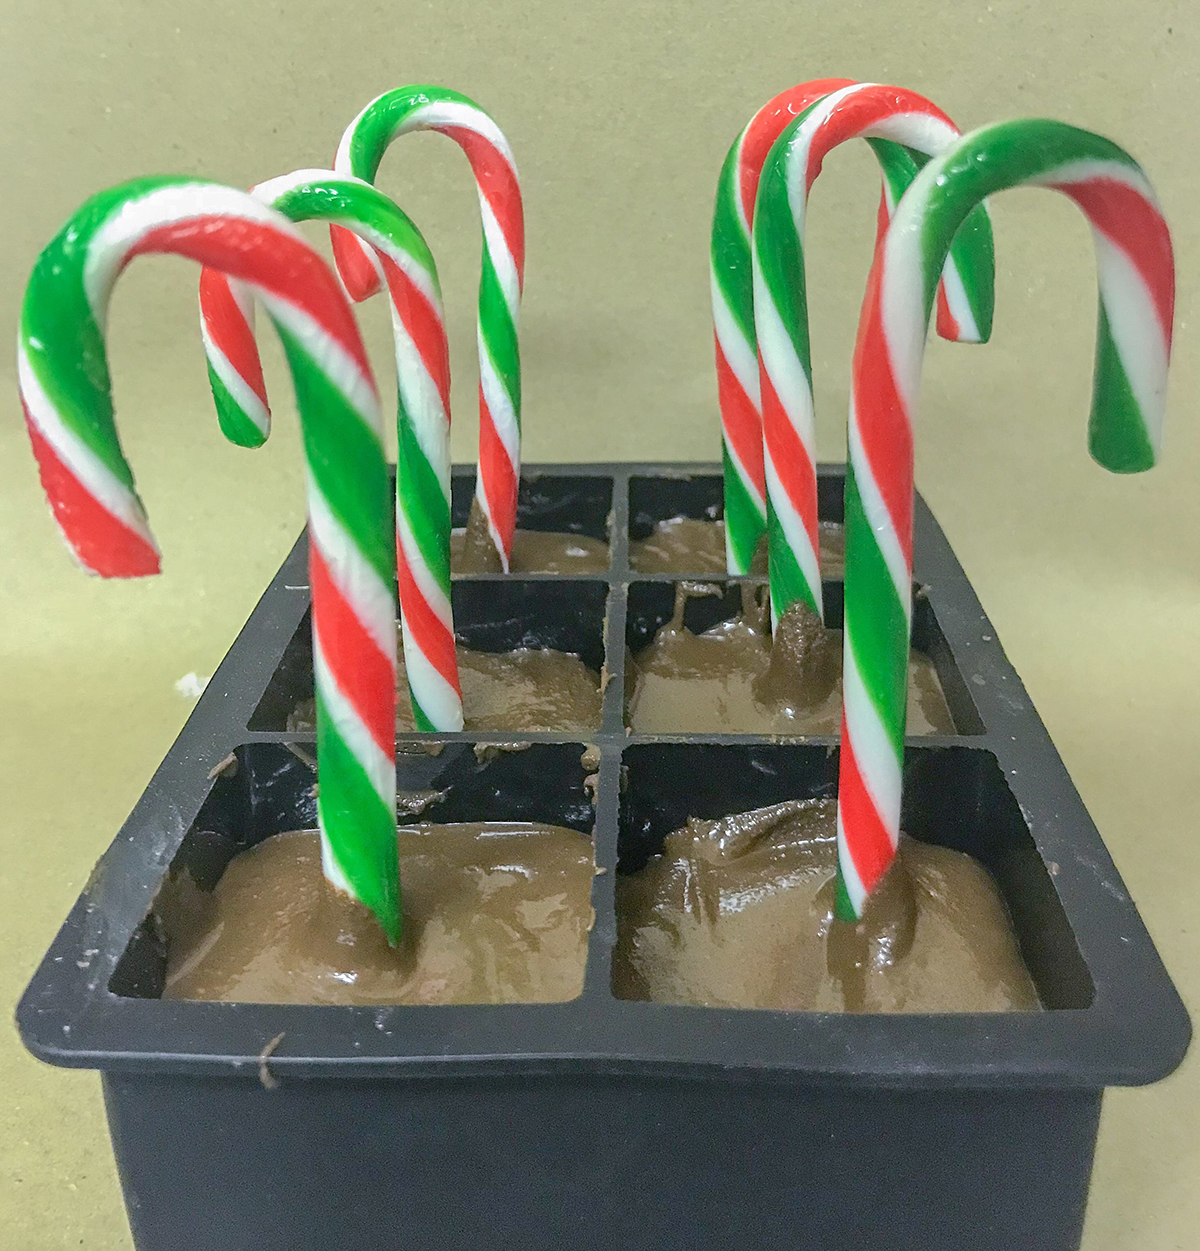 Candy Cane Hot Chocolate